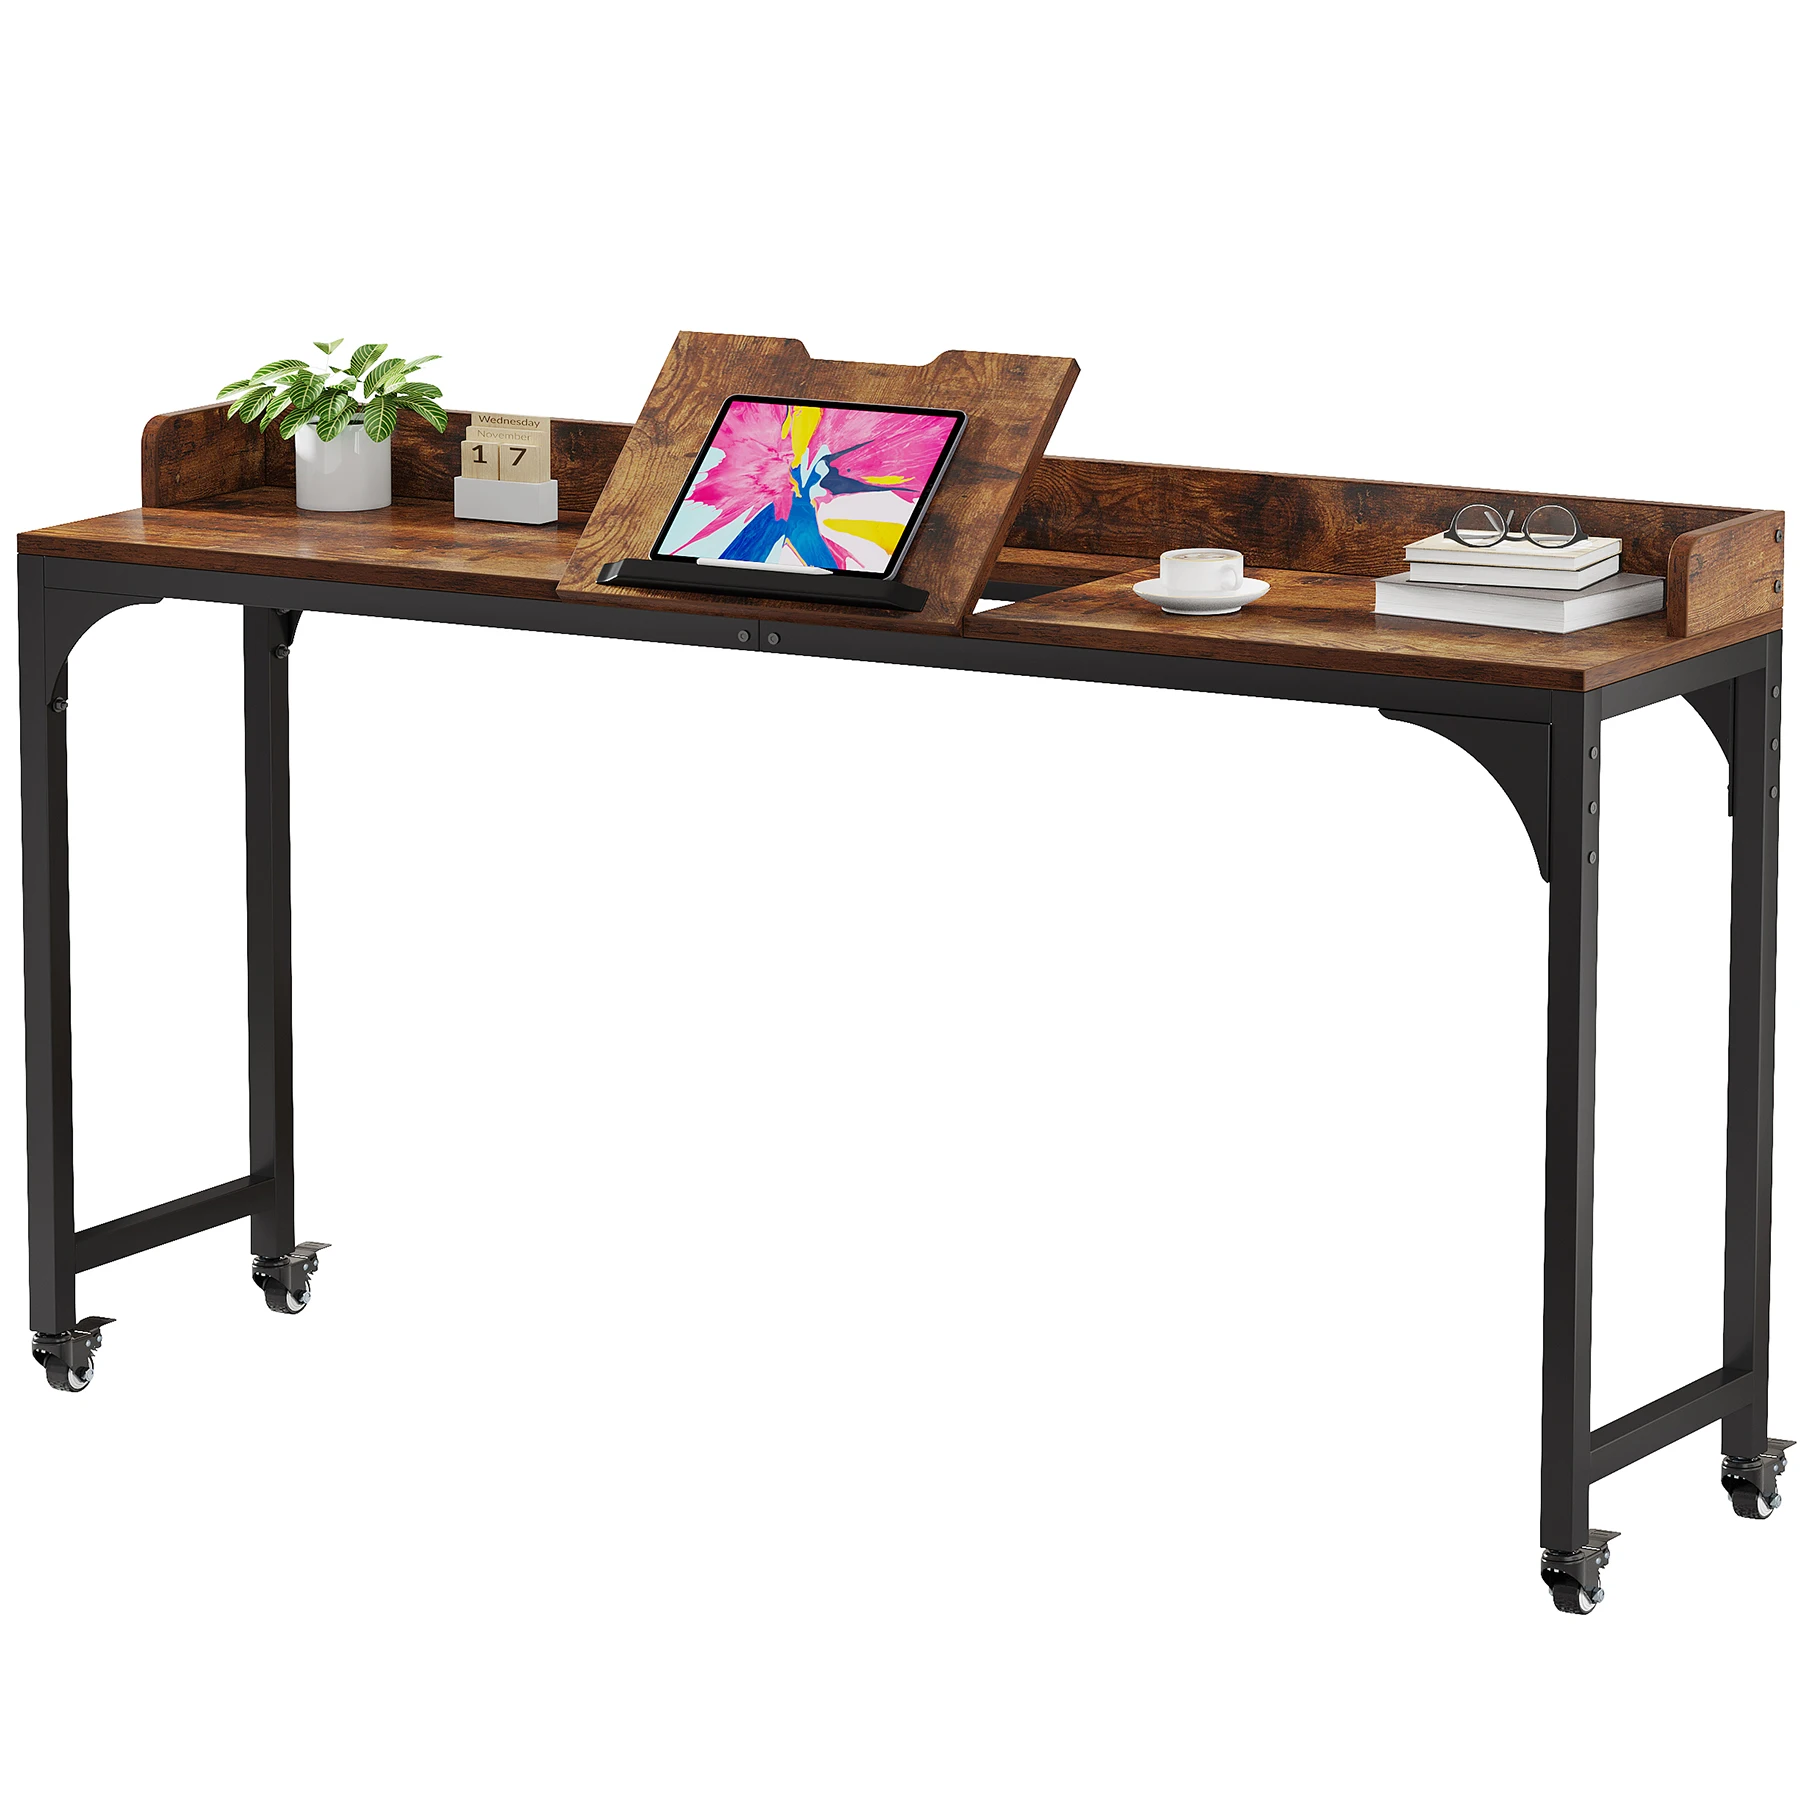 Over The Bed Long Coffee Table Mobile Wooden Laptop Desk With Adjustable Tilt Board